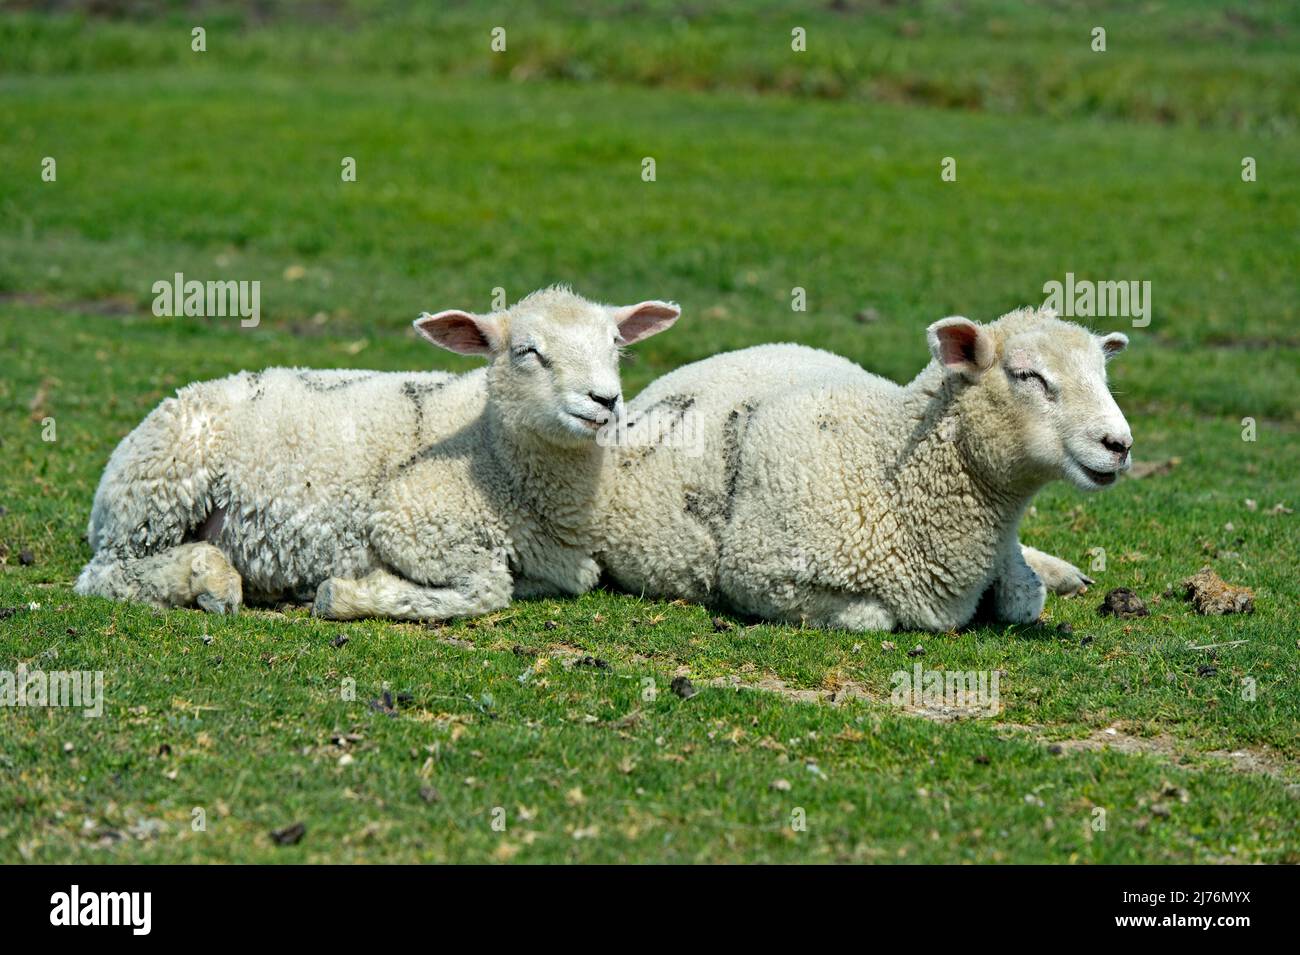 Two lambs of the Texel sheep breed resting on the pasture in the marshland, Schleswig-Holstein Wadden Sea National Park, Westerhever, Schleswig-Holstein, Germany Stock Photo